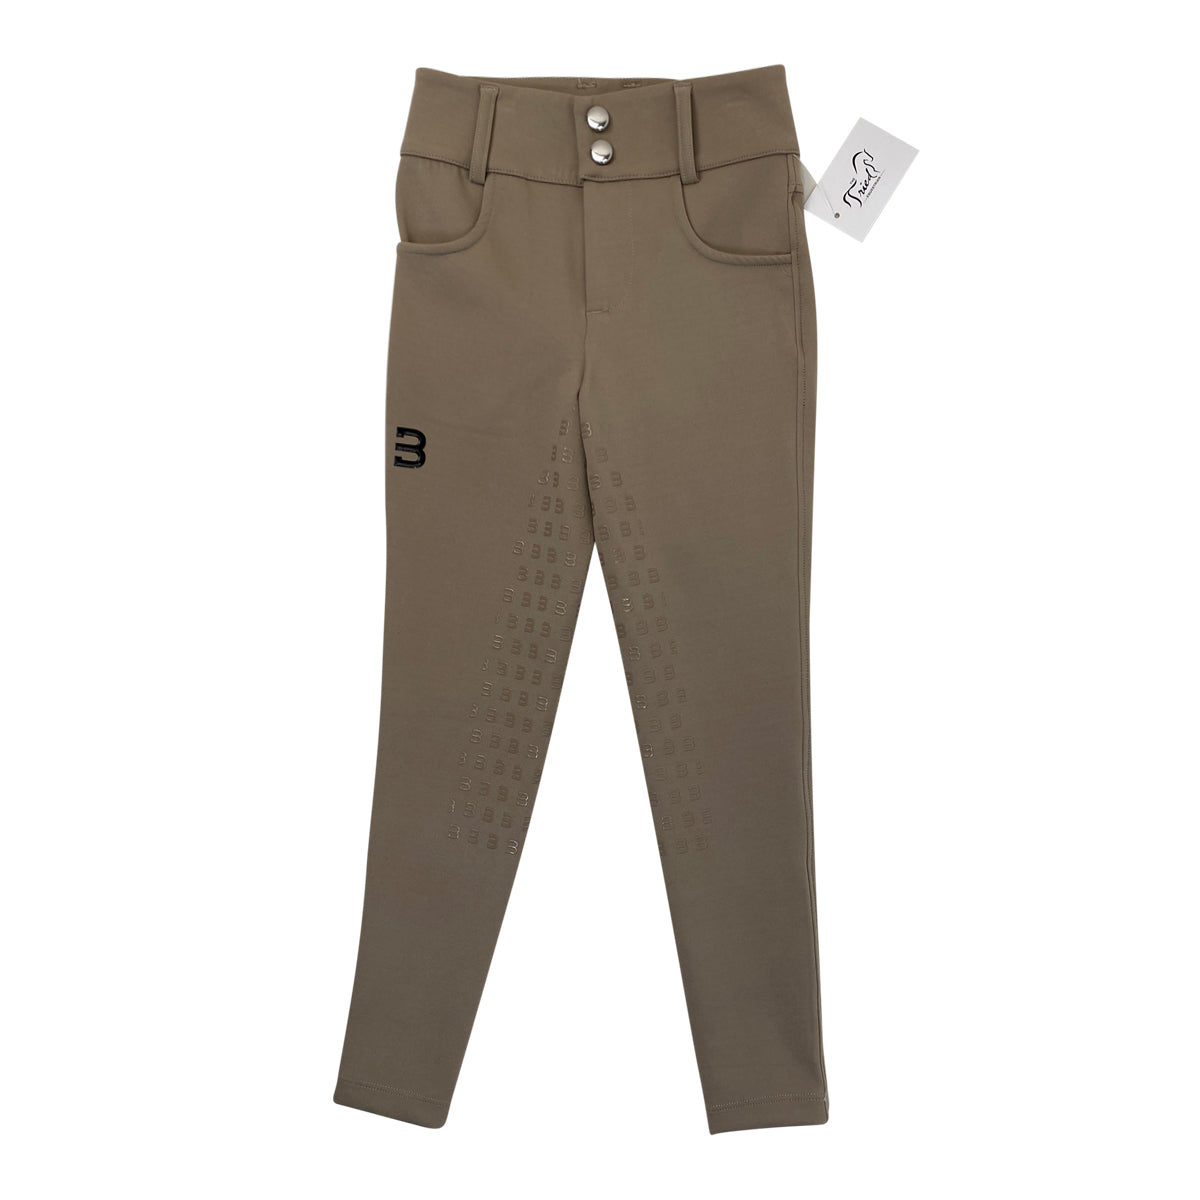 Bullet Equestrian Design Young Rider Full Seat Breeches in Mocha